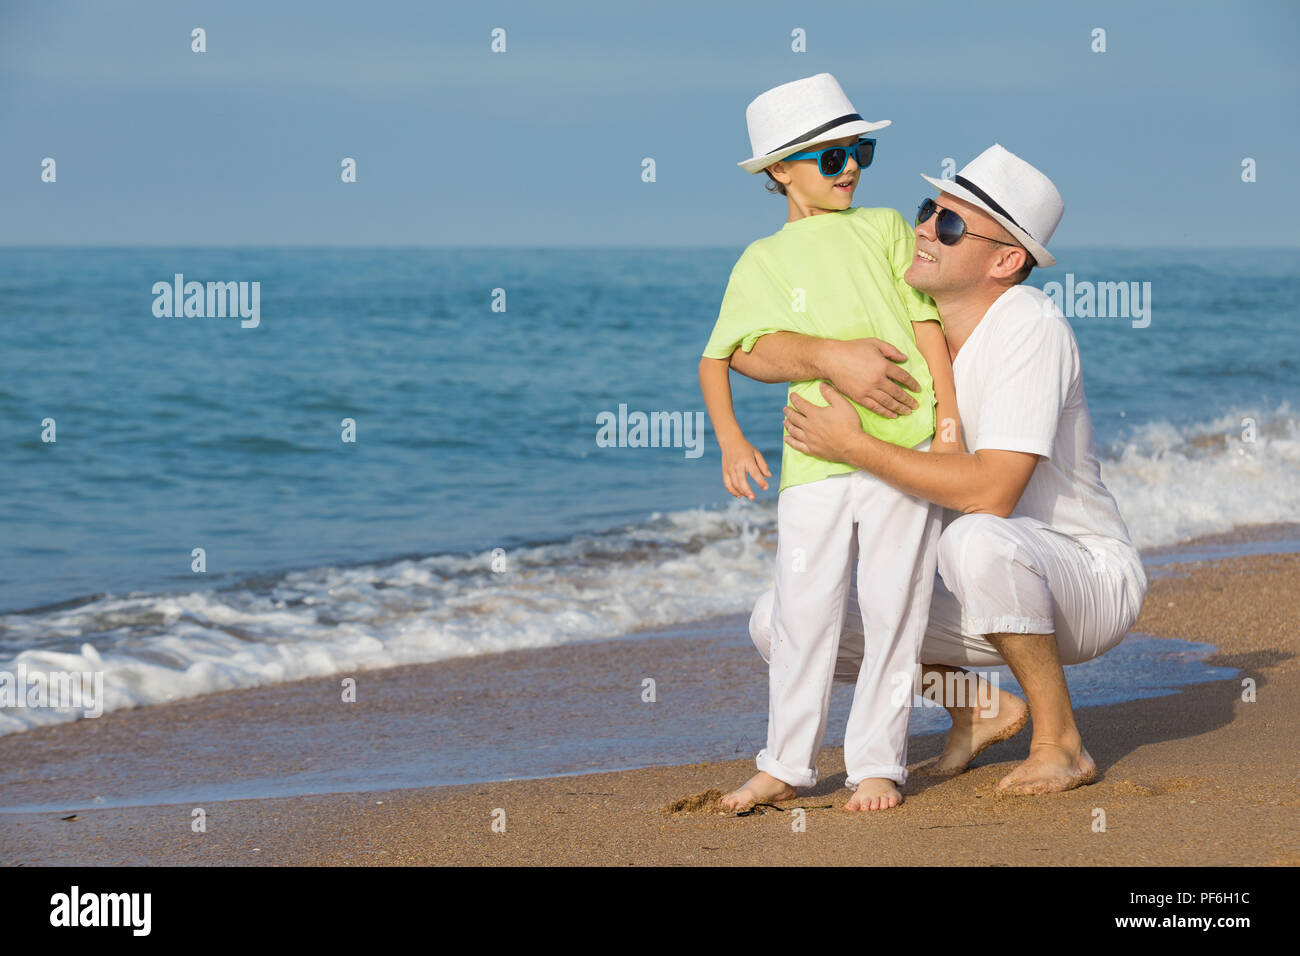 Father and son playing on the beach at the day time. People having fun outdoors. Concept of summer vacation and friendly family. Stock Photo